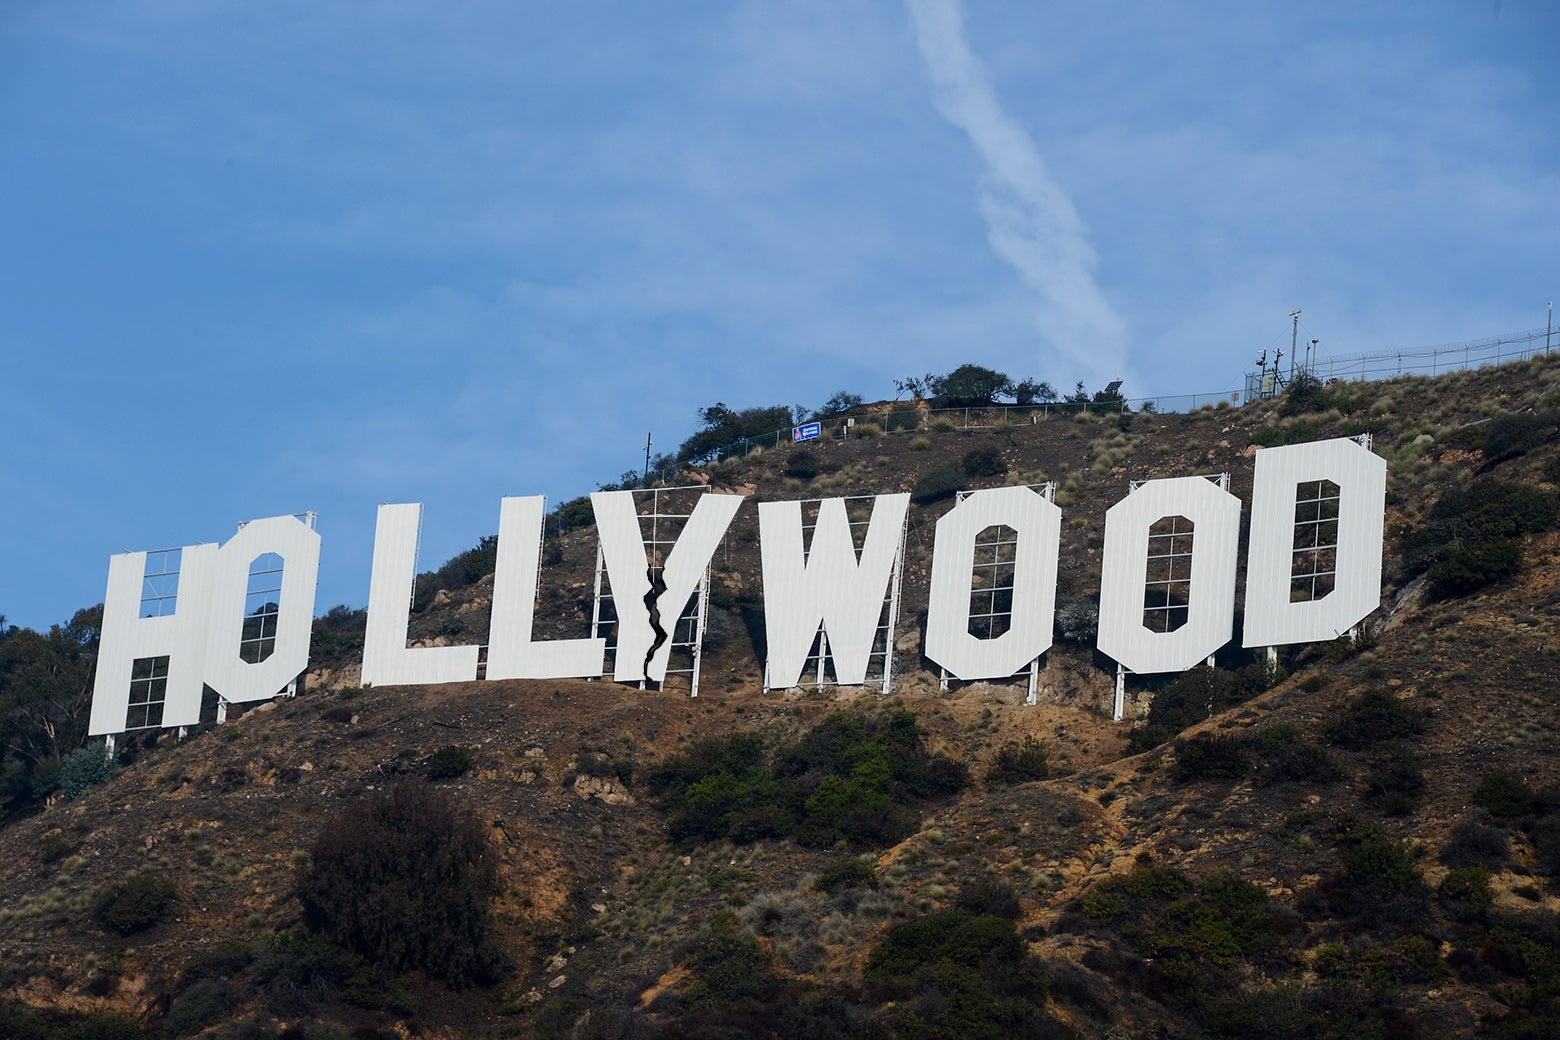 A picture of the Hollywood sign, with a schism down the middle.